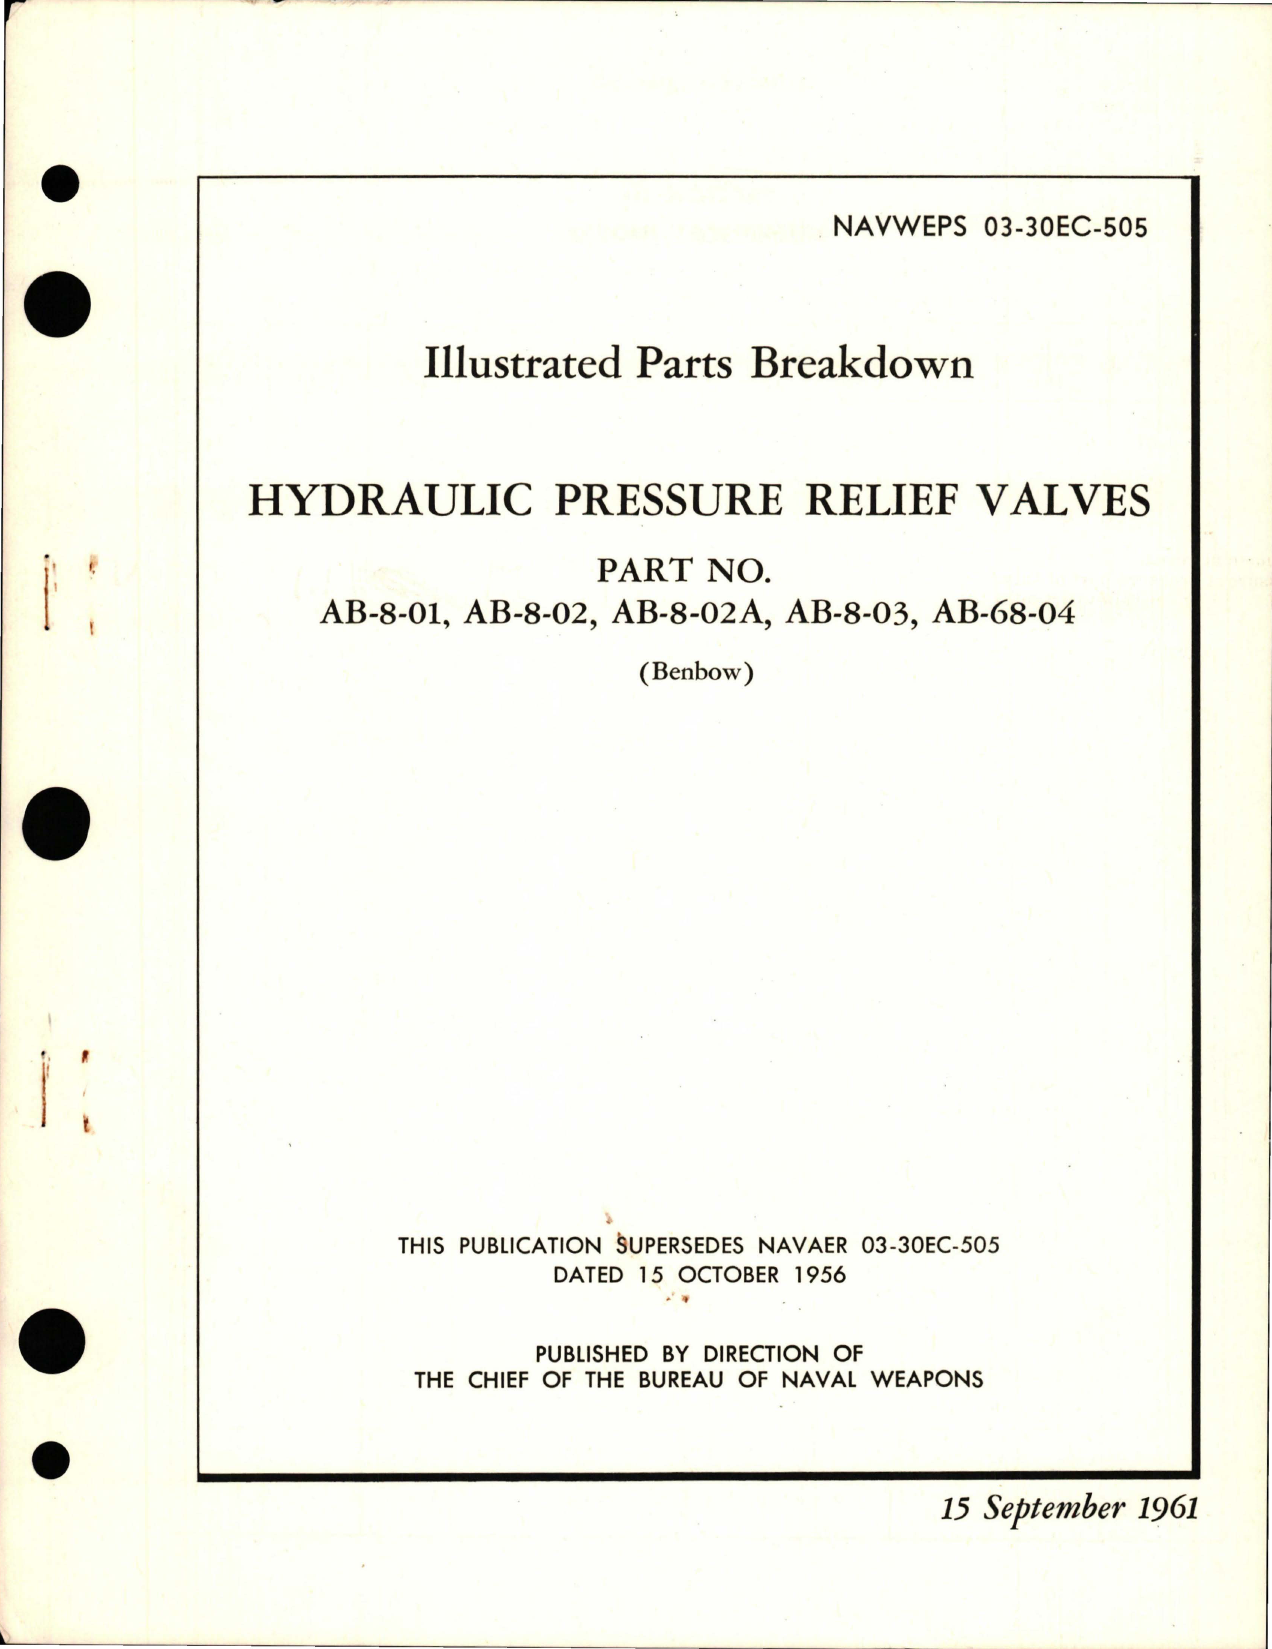 Sample page 1 from AirCorps Library document: Illustrated Parts Breakdown for Hydraulic Pressure Relief Valves - Parts AB-8-01, AB-8-02, AB-8-02A, AB-8-03, and AB-68-04